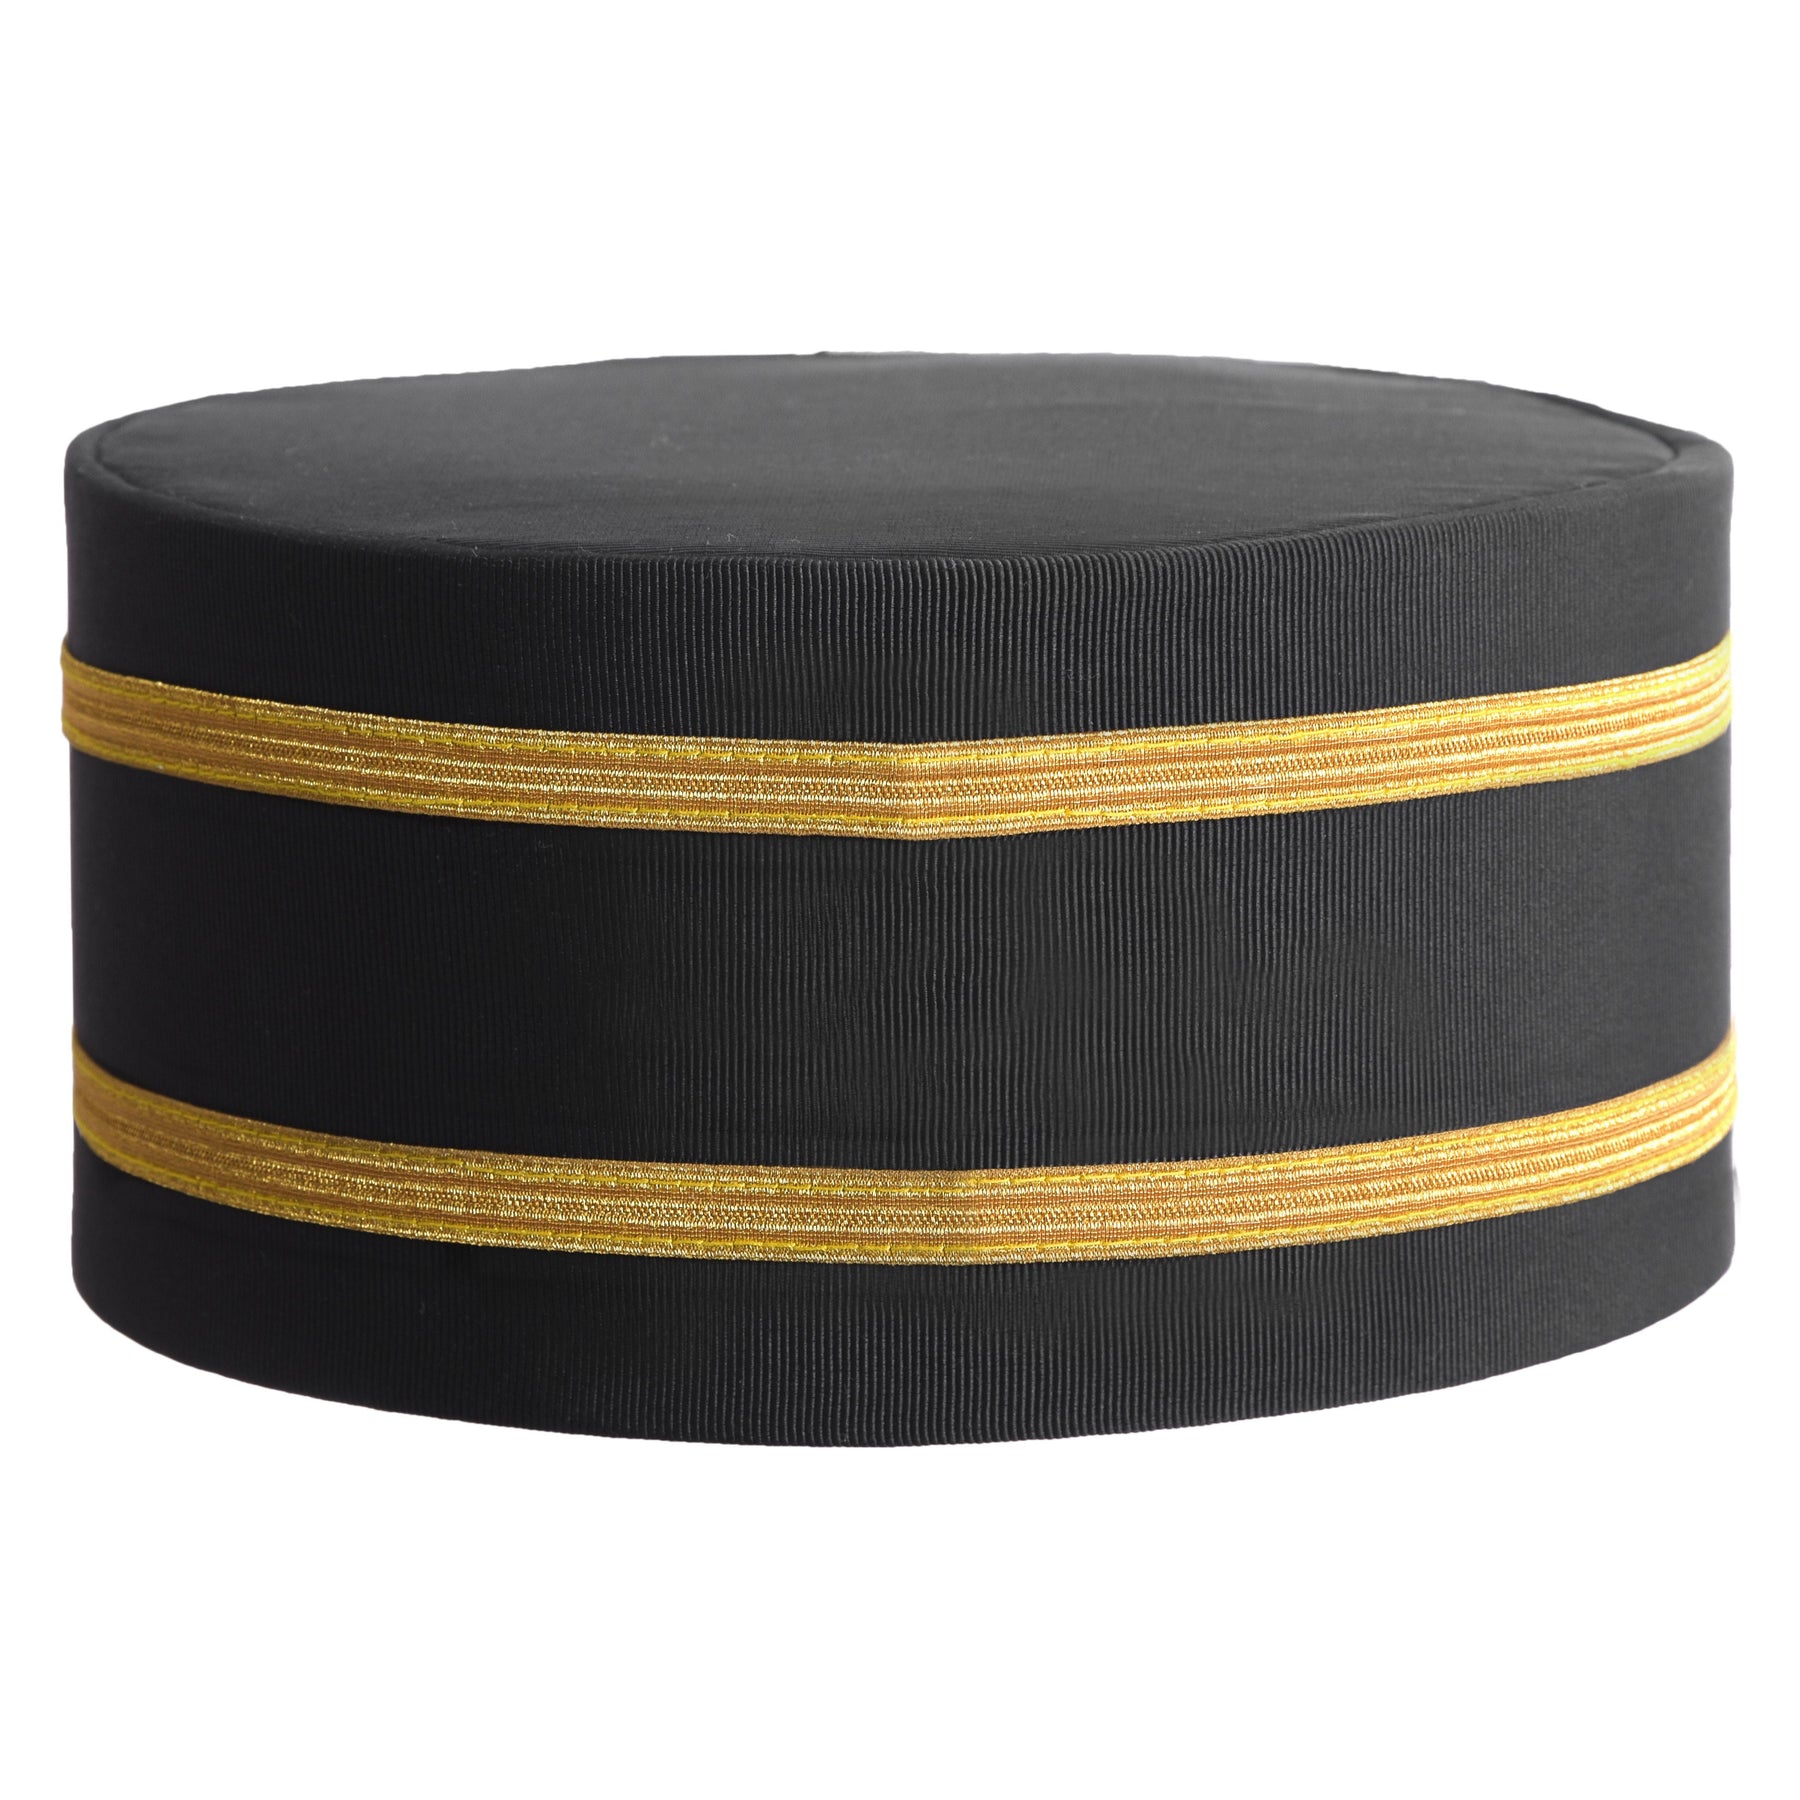 Past Master Blue Lodge California Regulation Crown Cap - White Patch With Double Braid - Bricks Masons